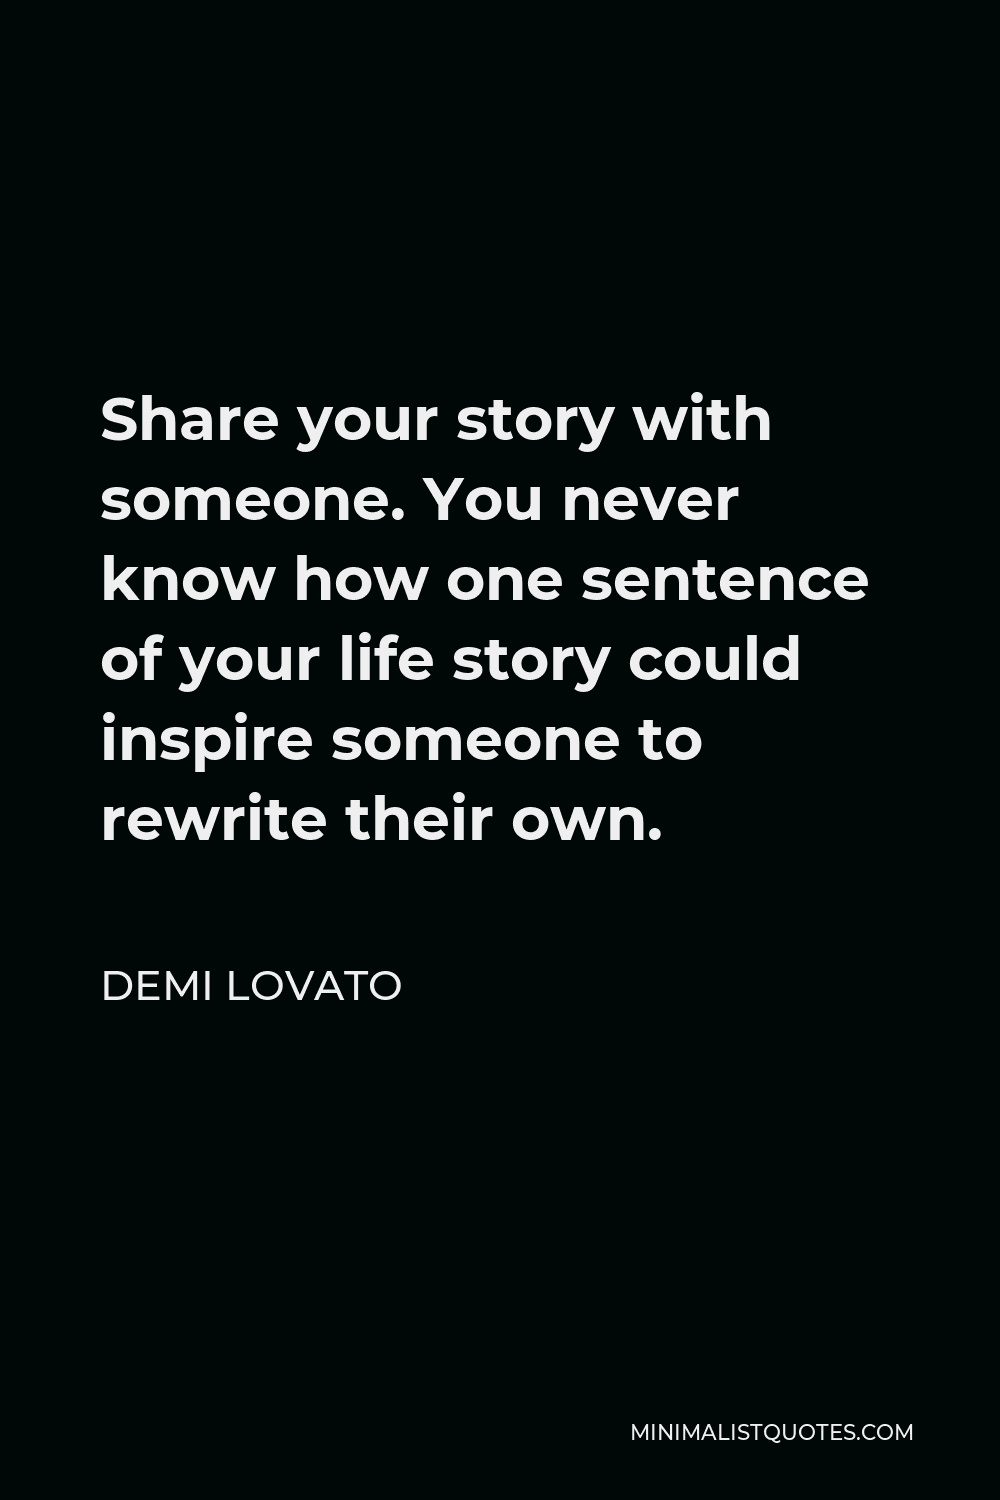 Demi Lovato Quote - Share your story with someone. You never know how one sentence of your life story could inspire someone to rewrite their own.